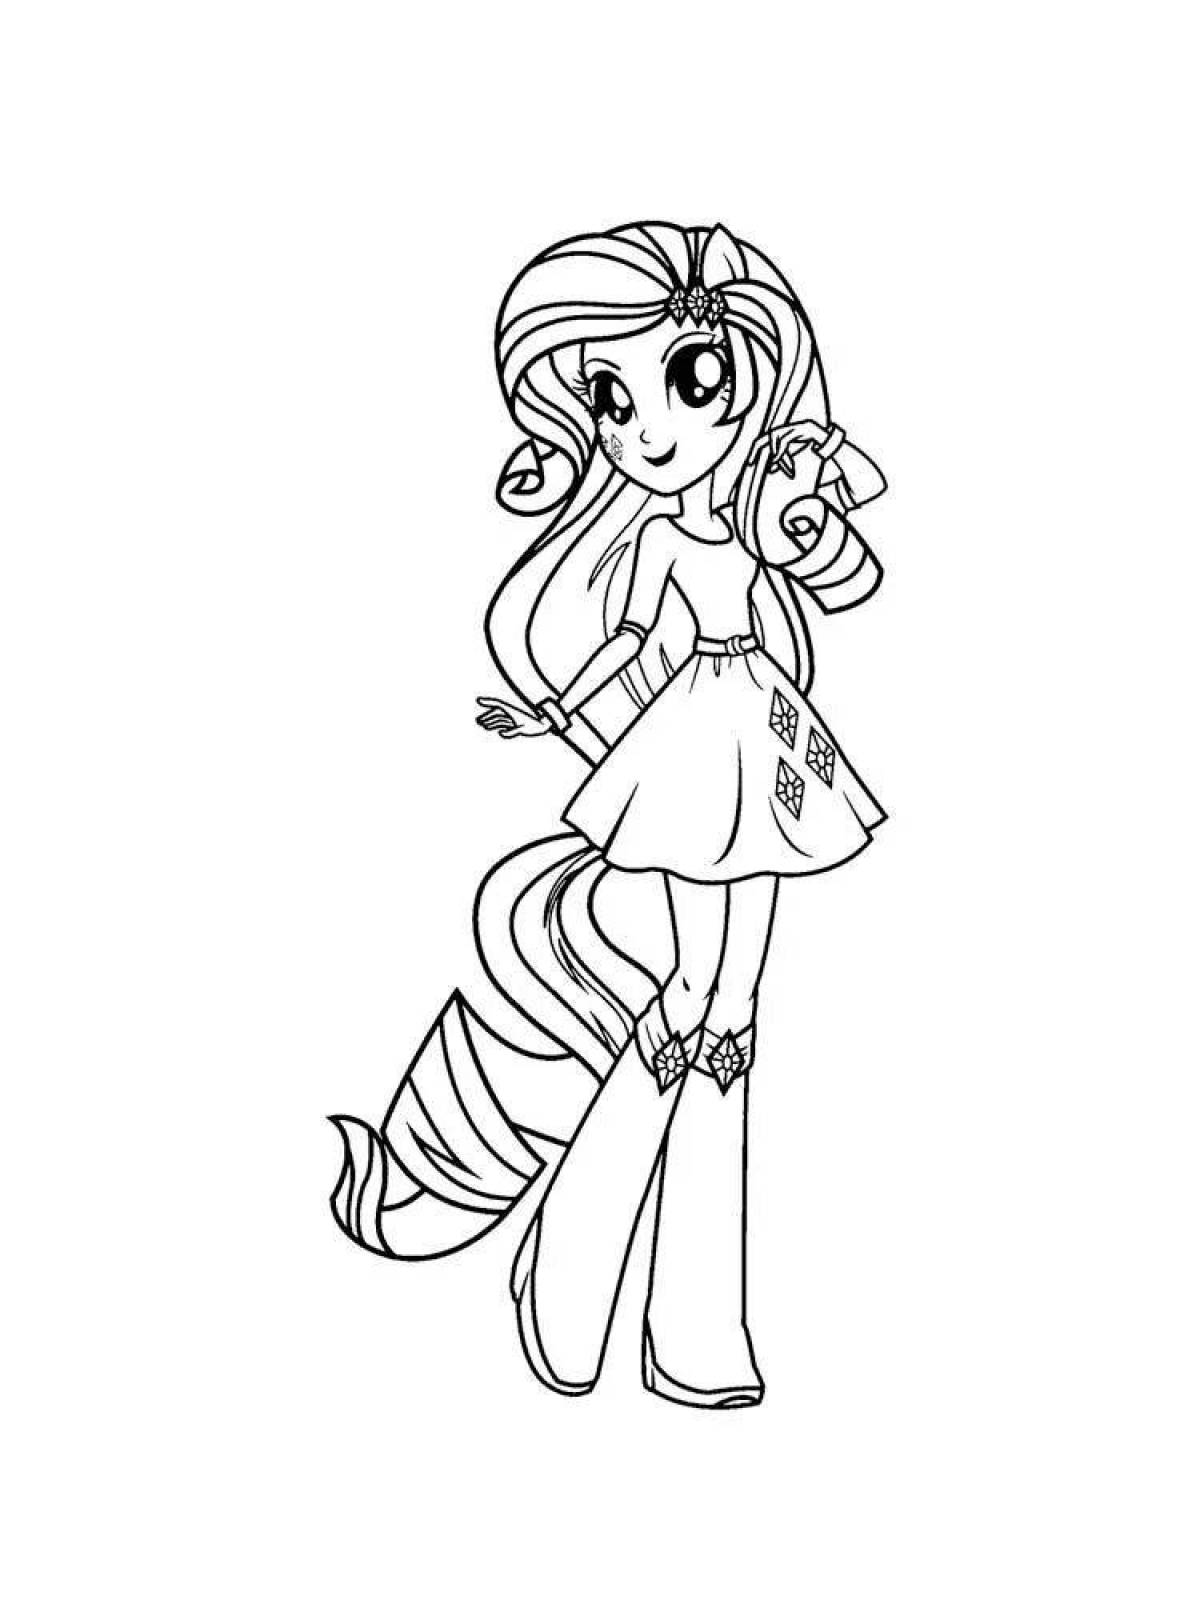 Coloring page dazzling pony man